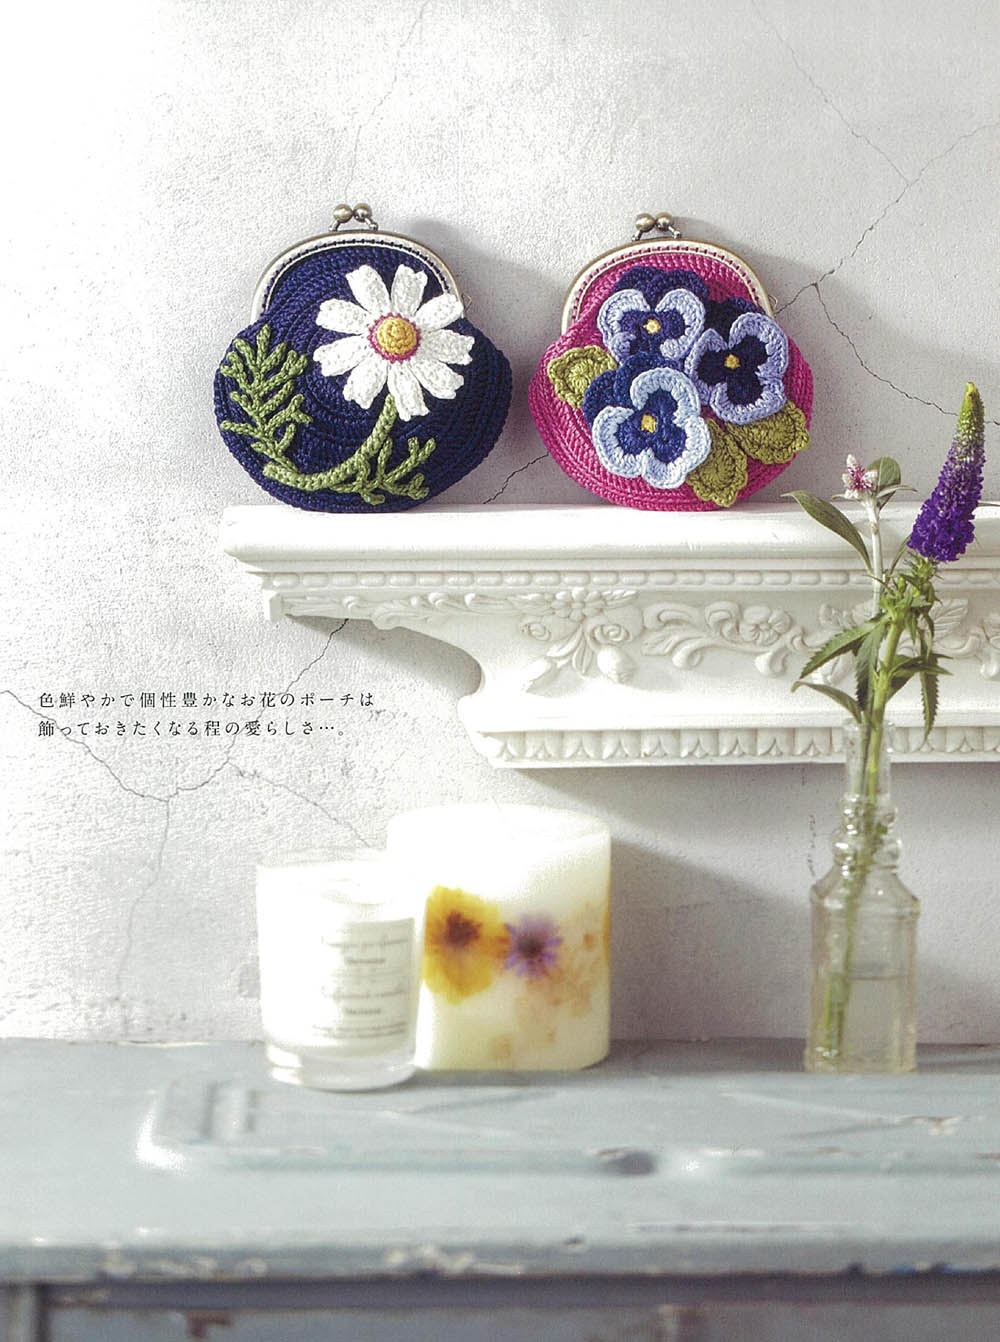 Cute Crochet embroidery yarn knitting small flowers of the pouch